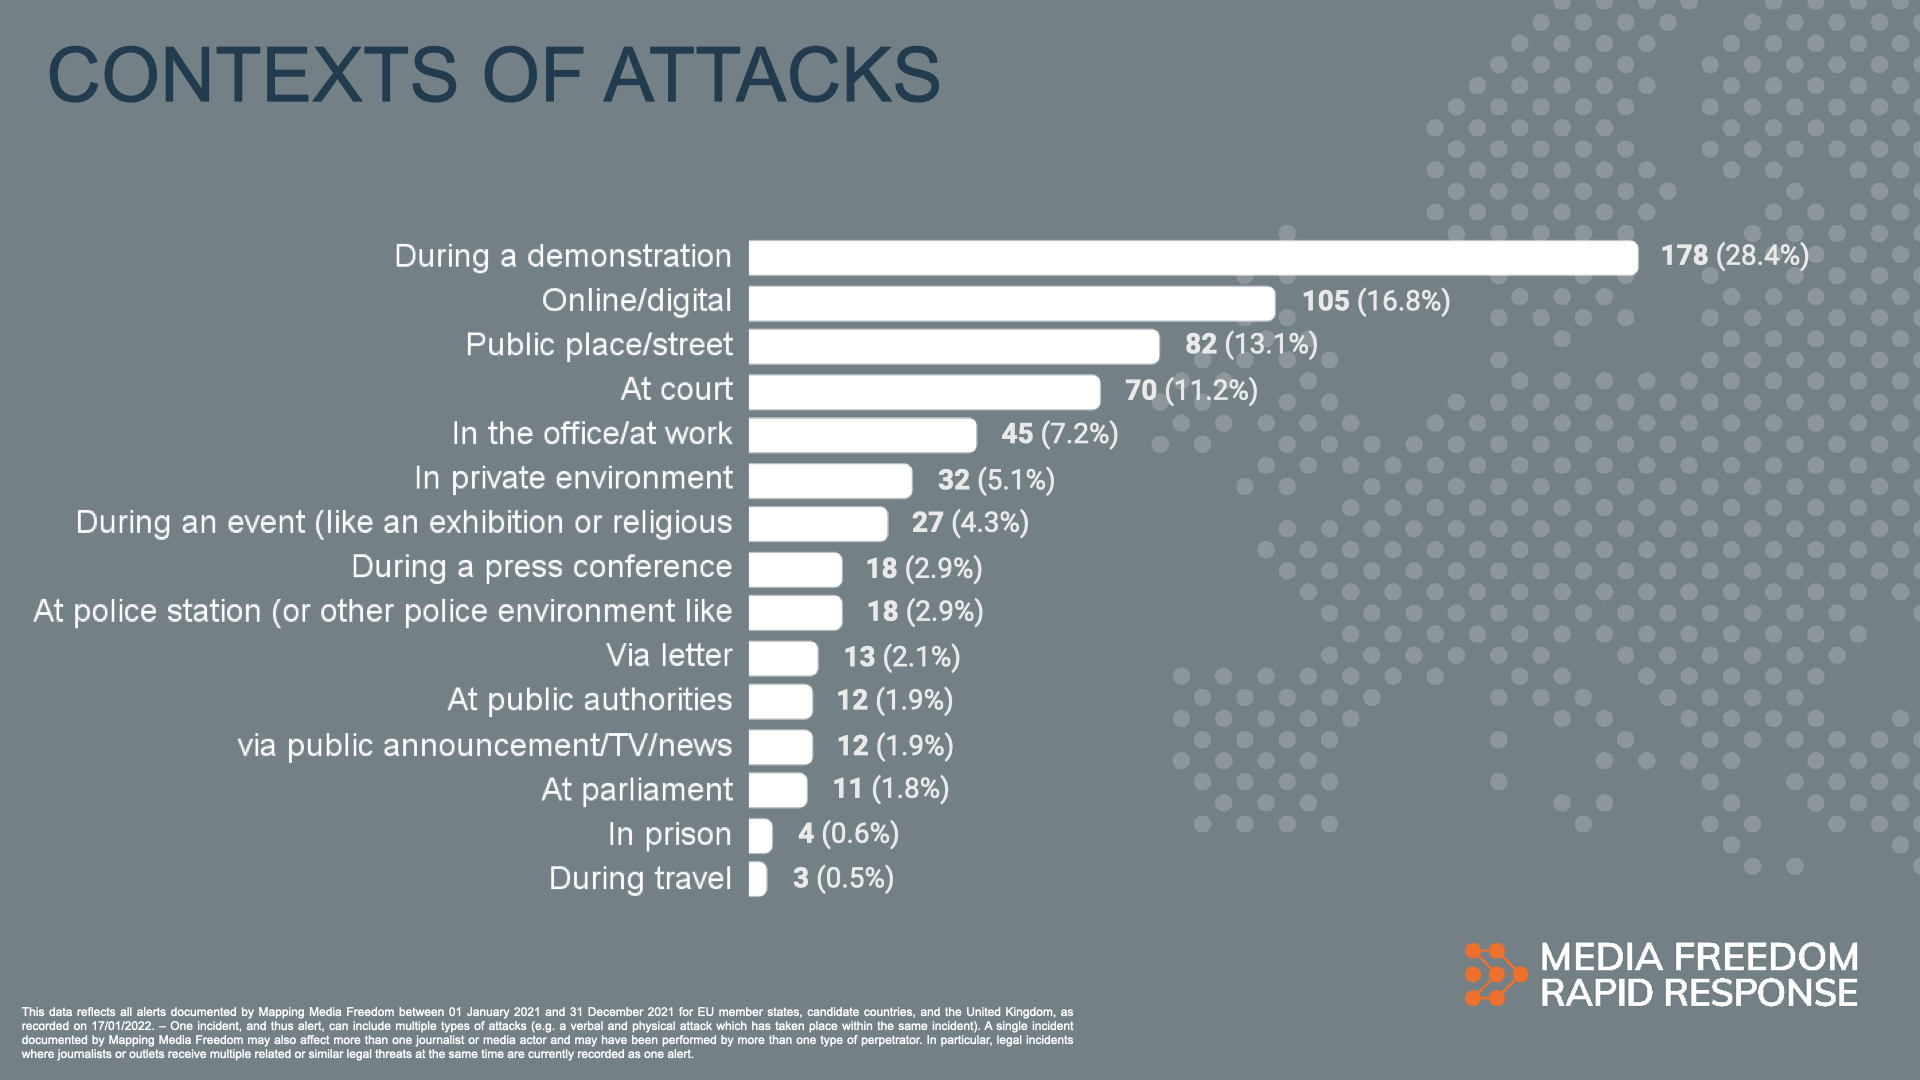 In terms of where the attacks took place, most media freedom violations took place at demonstrations, where 178 alerts were recorded — 28.4% of the total. Following this, alerts were also recorded online or in digital spheres (16.8%), in public places or on the street (13.1%), at court (11.2%), at work (7.2%), during an event (4.3%), at press conferences (2.9%), and at police stations (2.9%). A breakdown of other contexts for violations can be found below.